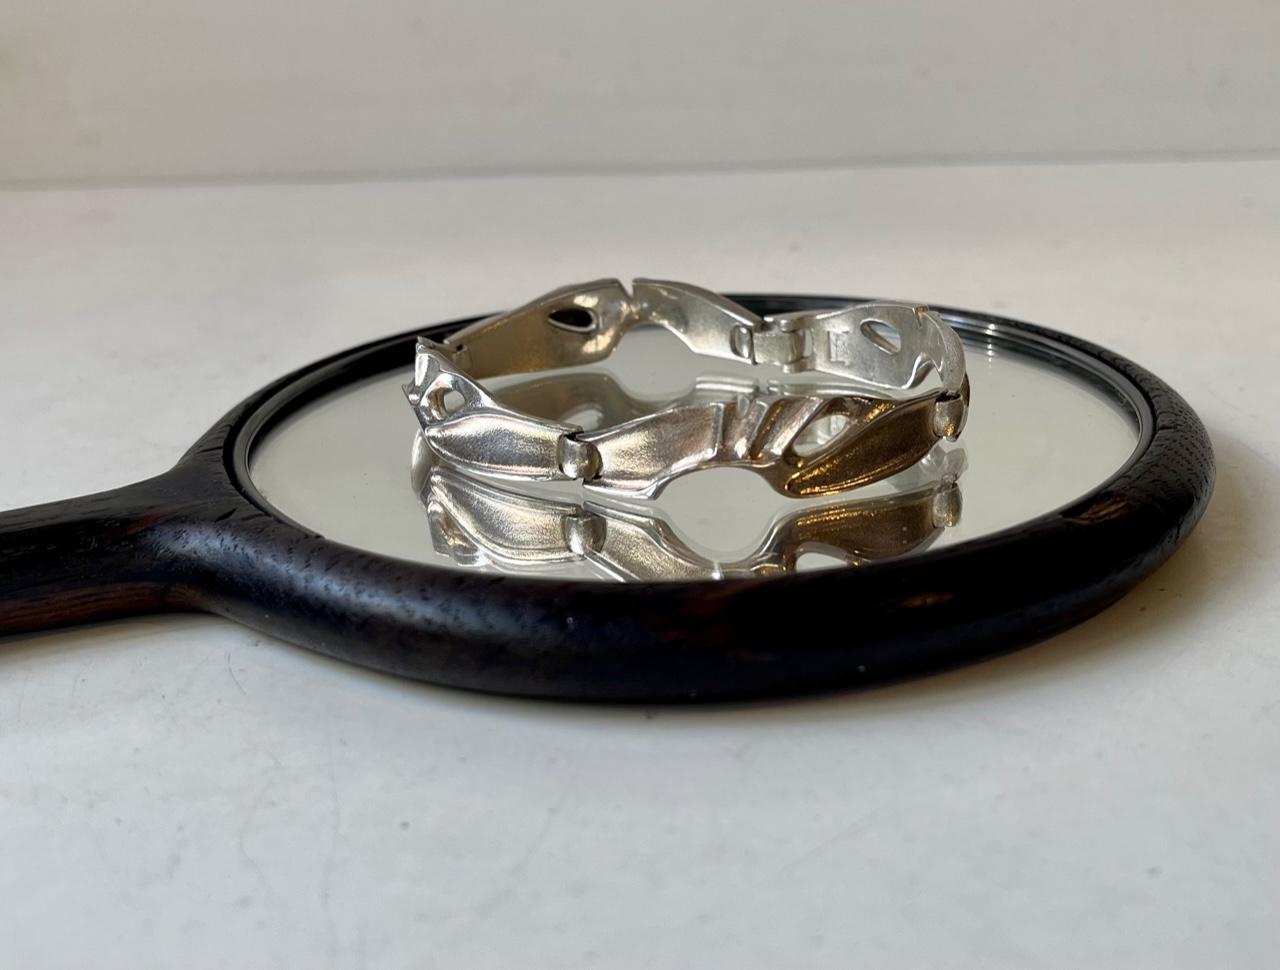 Much sought after vintage 'organic' modern sterling silver bracelet. Fully hallmarked by Lapponia, Finland. Designed during the 1970s by Bjorn Weckstrom.
Measures: Length closed: 7.1in / 18cm. Width: 14mm.


